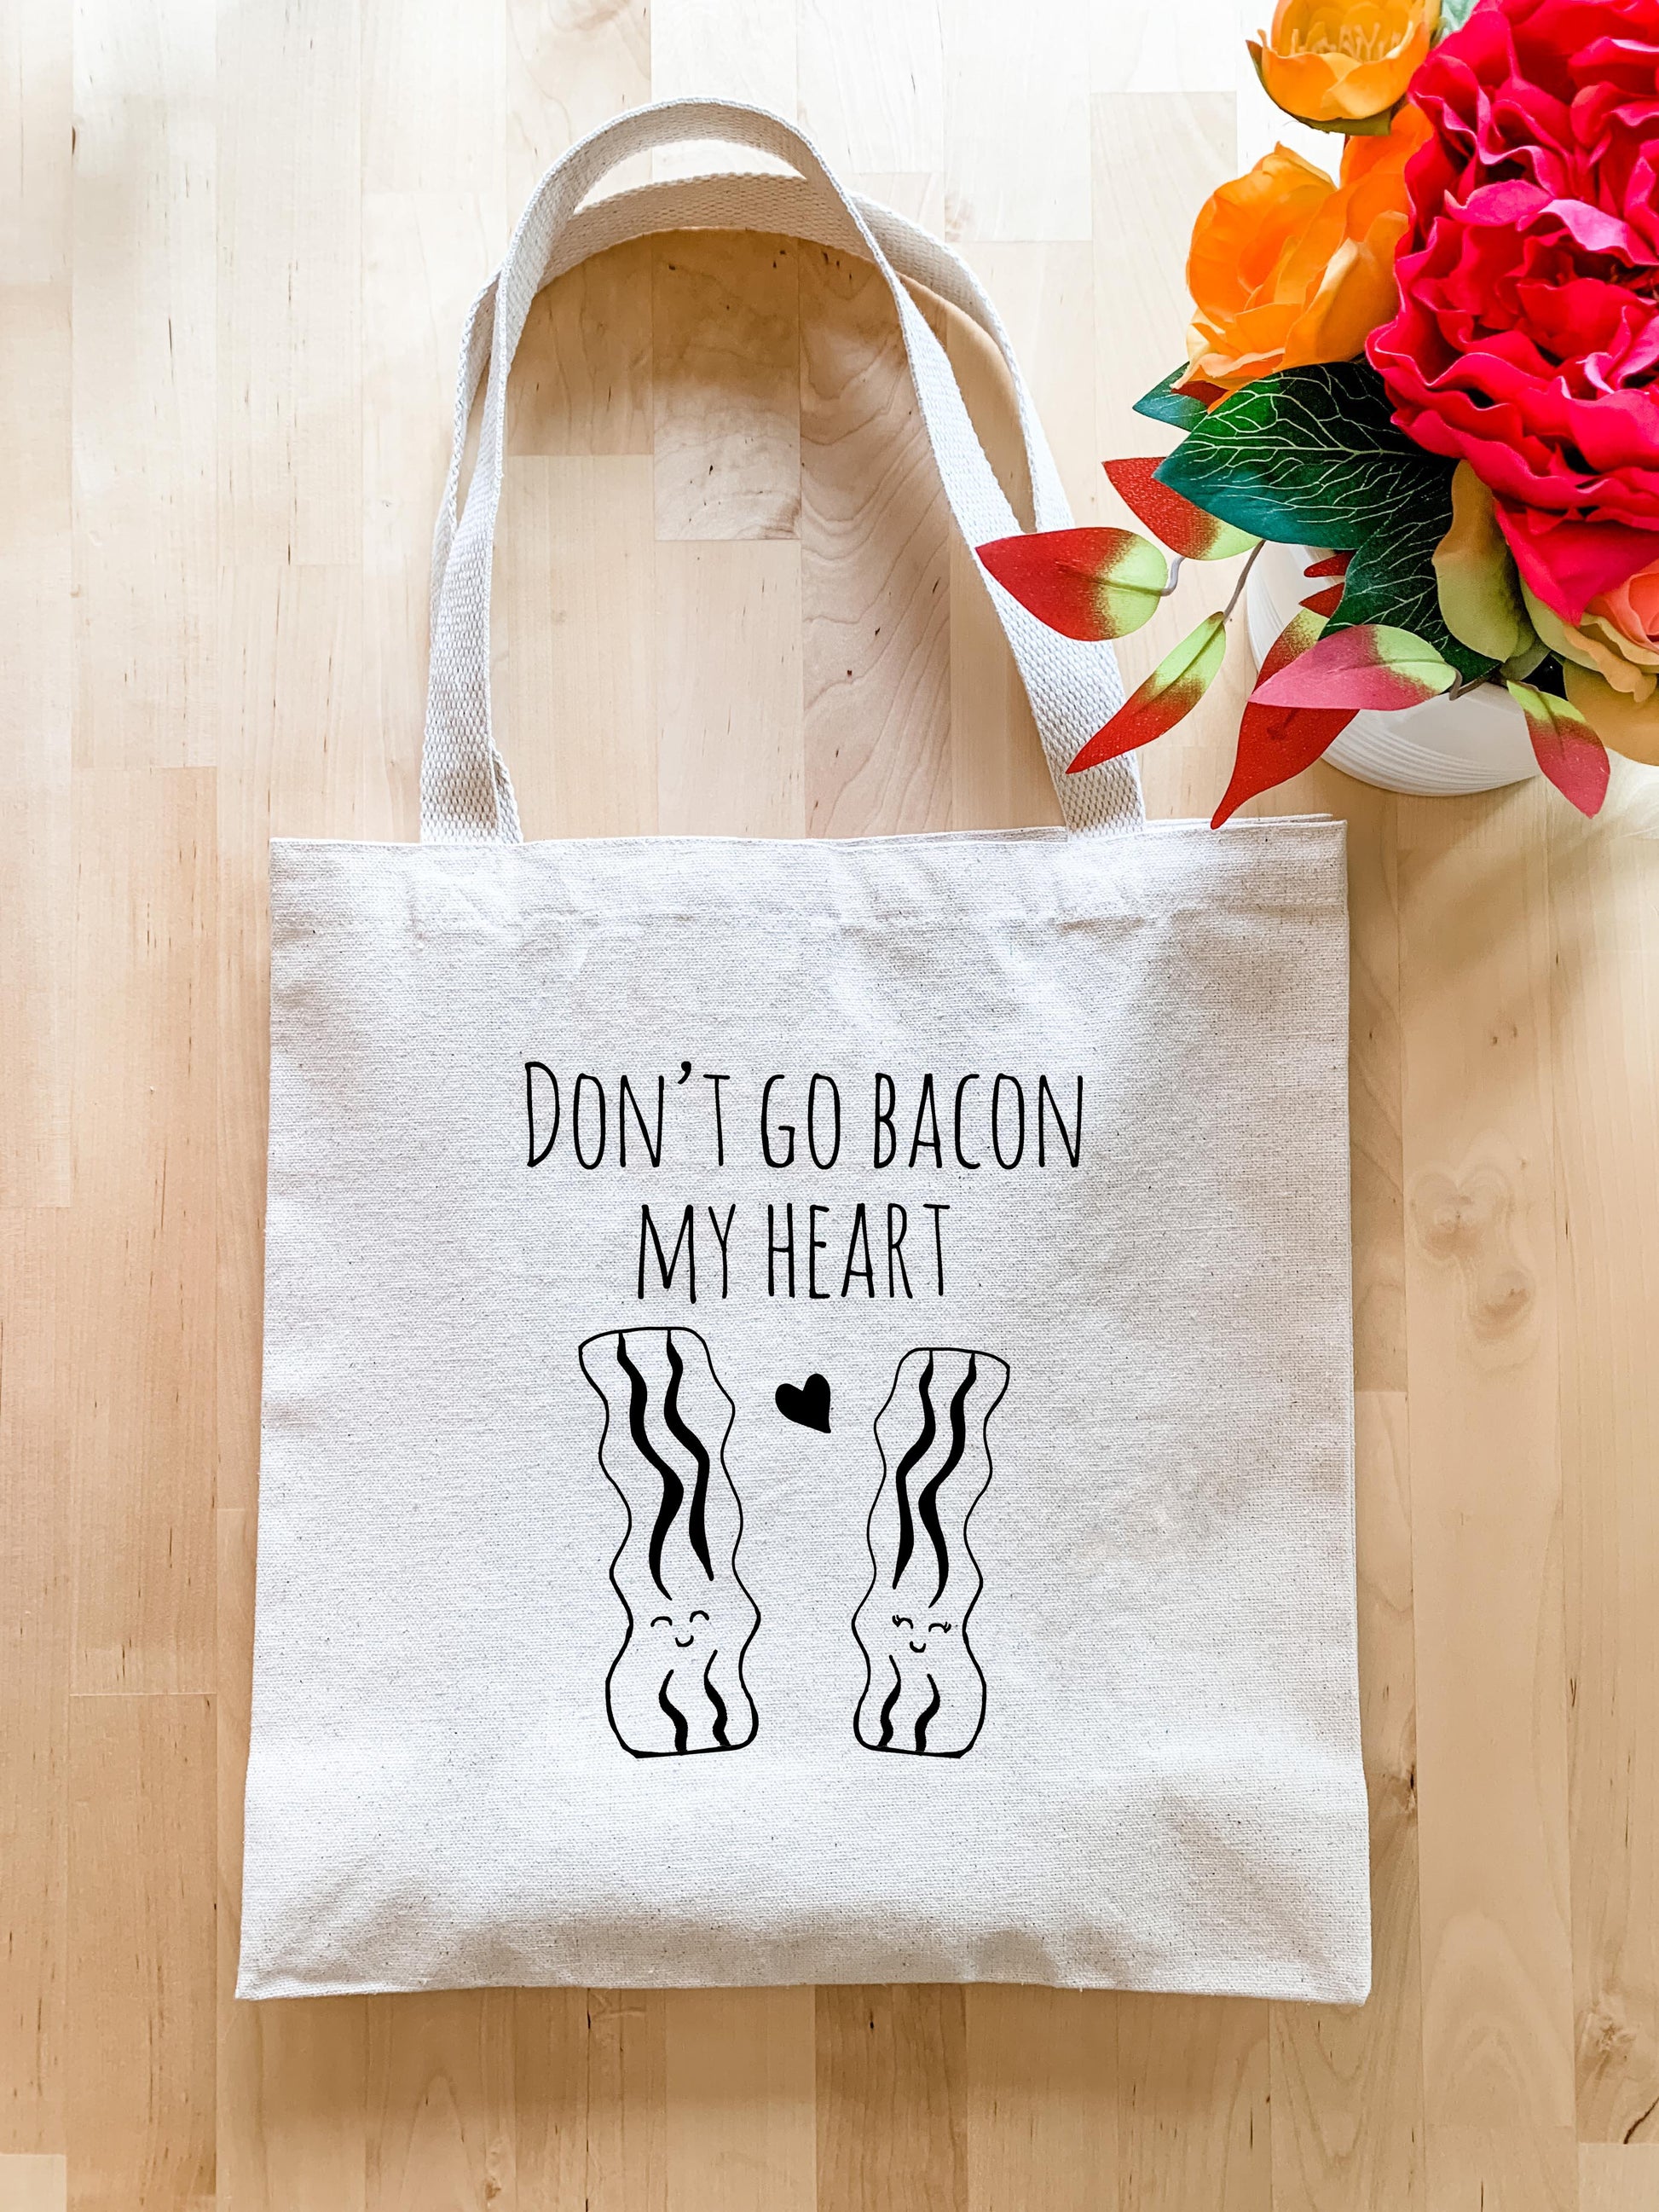 Don't Go Bacon My Heart - Tote Bag - MoonlightMakers